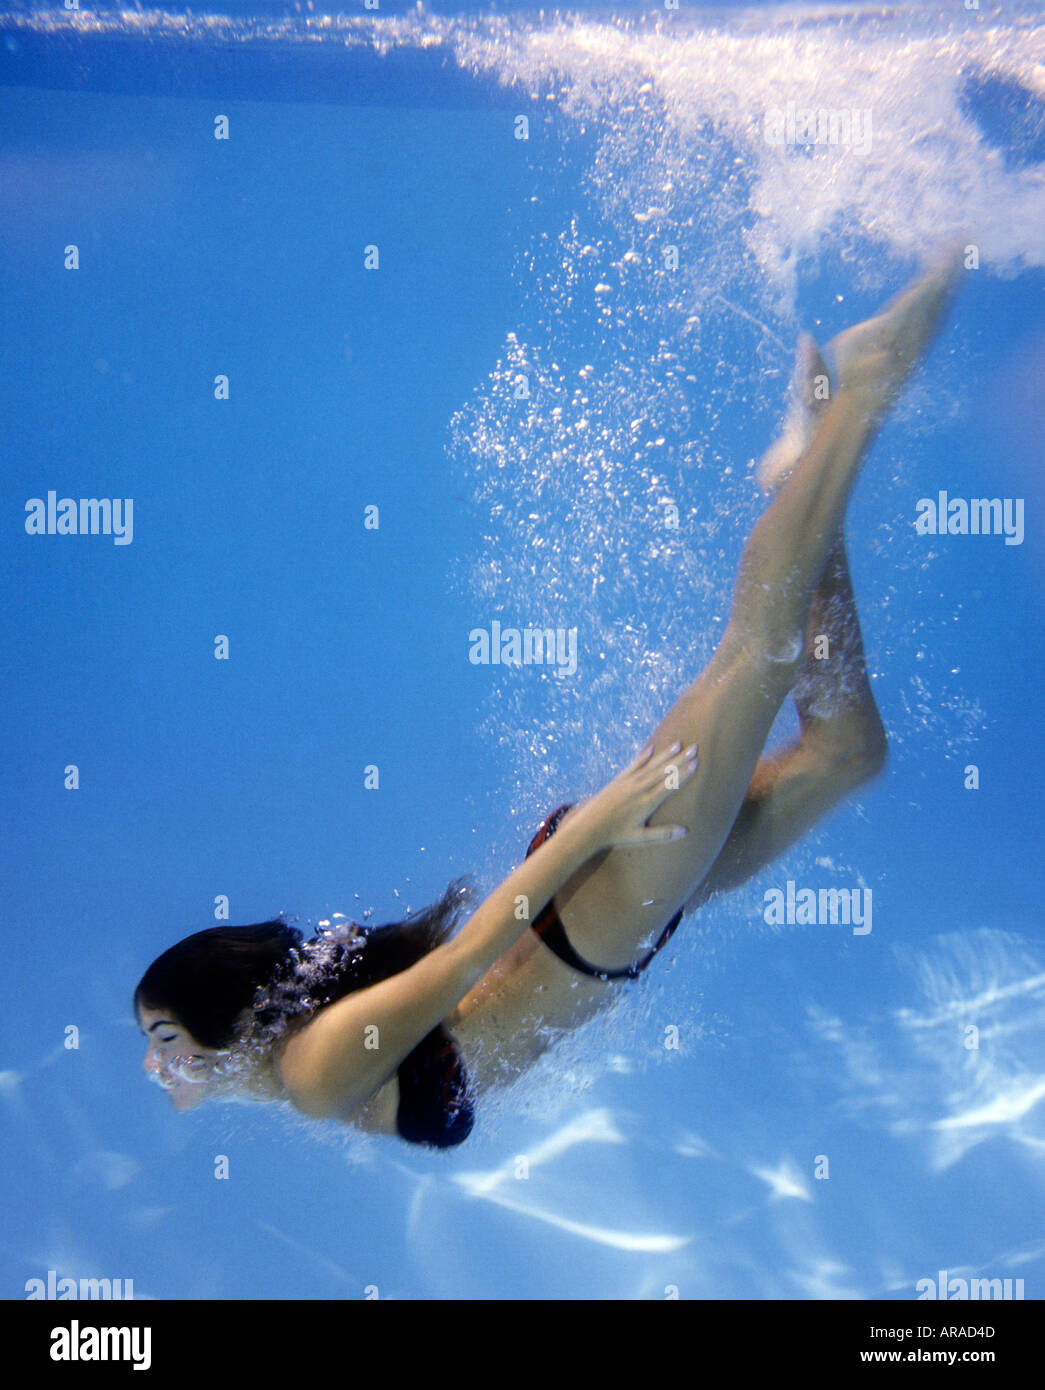 Girl swimming underwater in pool Banque D'Images